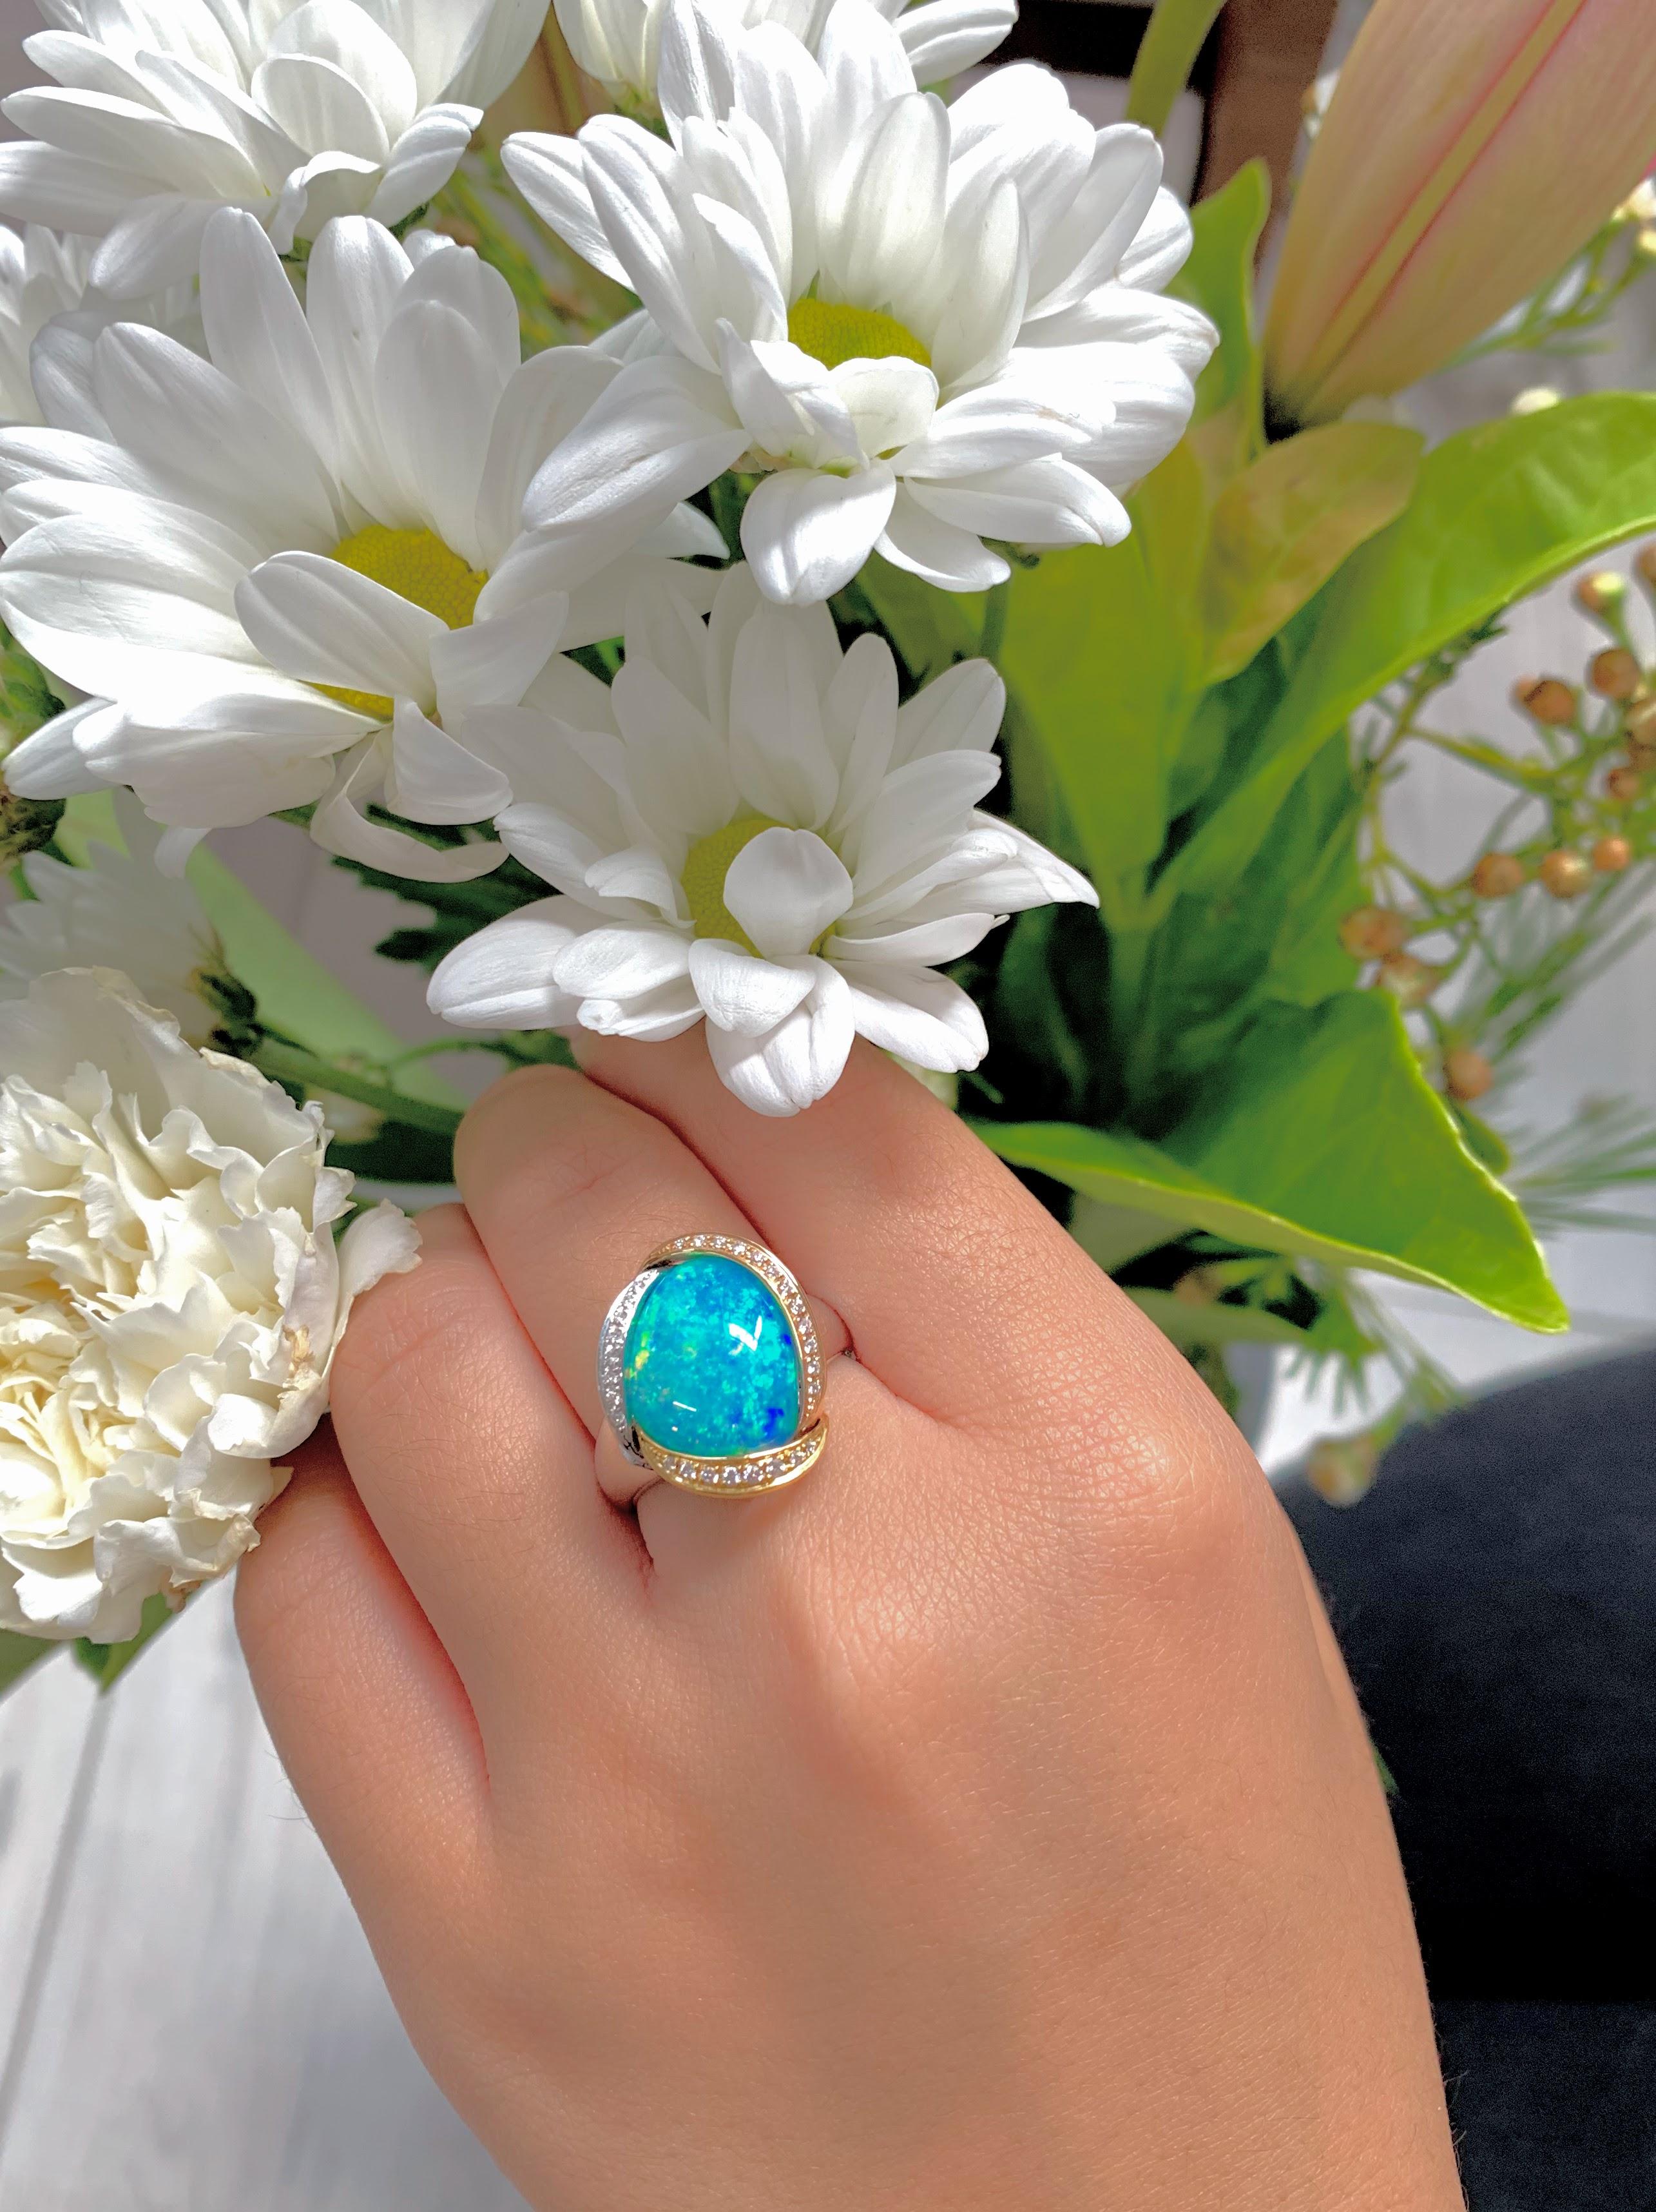 “Love in the Afternoon” delights with its precious boulder opal (7.63ct) caught in an 18K gold and diamond embrace. This splendid piece is the perfect symbol of love. The opal comes from our own mines in Jundah Opalville. The ring is designed by